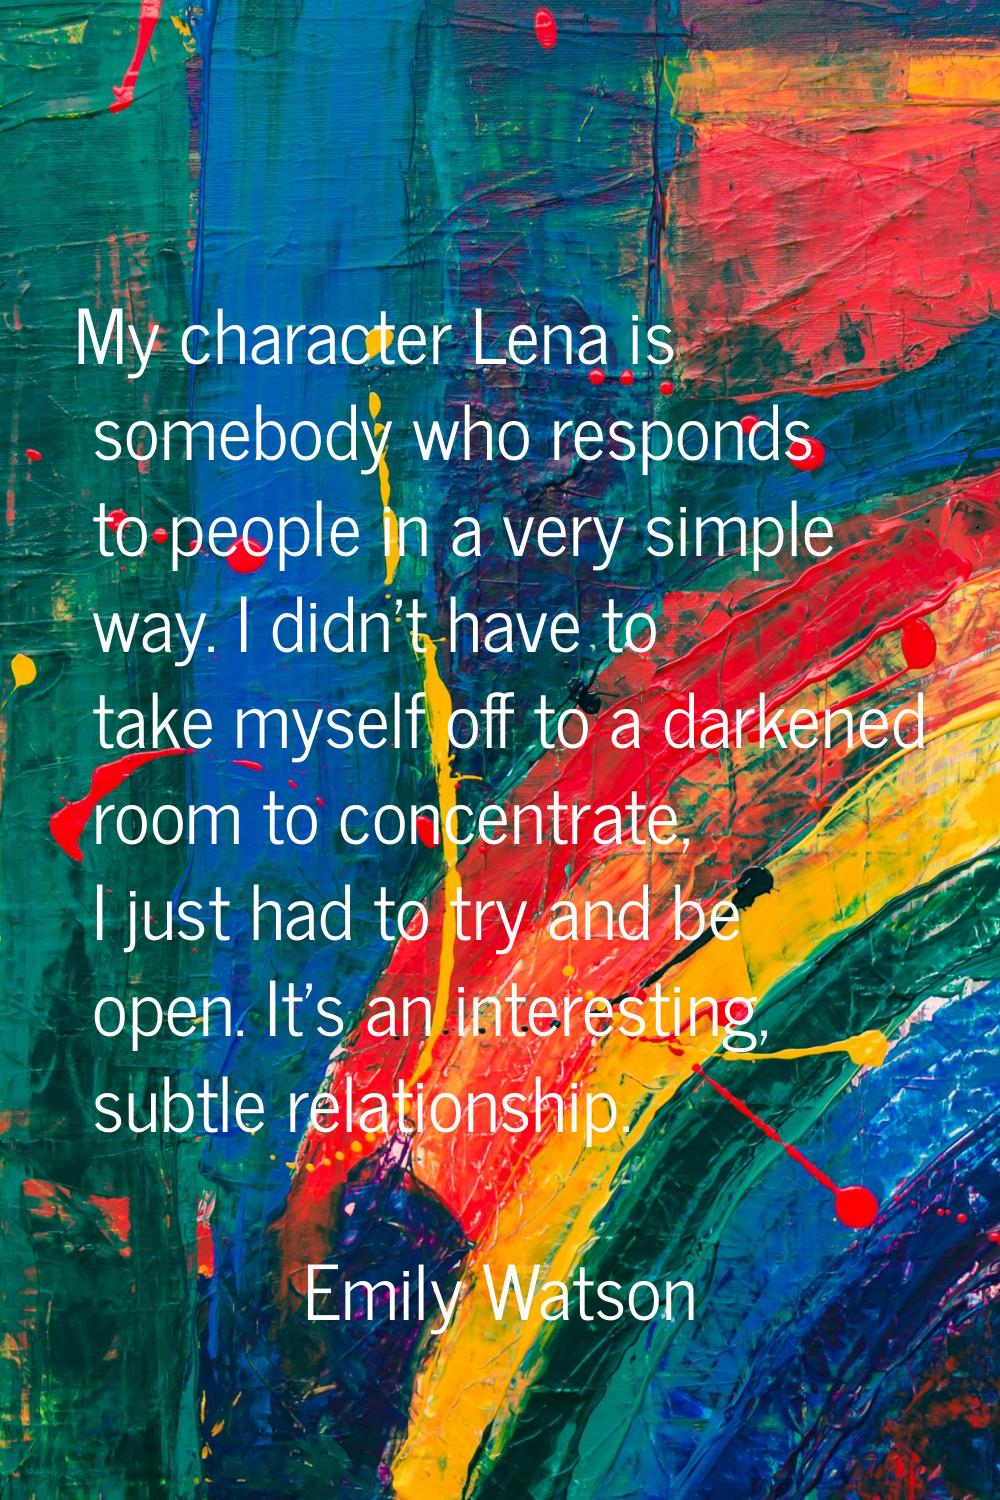 My character Lena is somebody who responds to people in a very simple way. I didn't have to take my